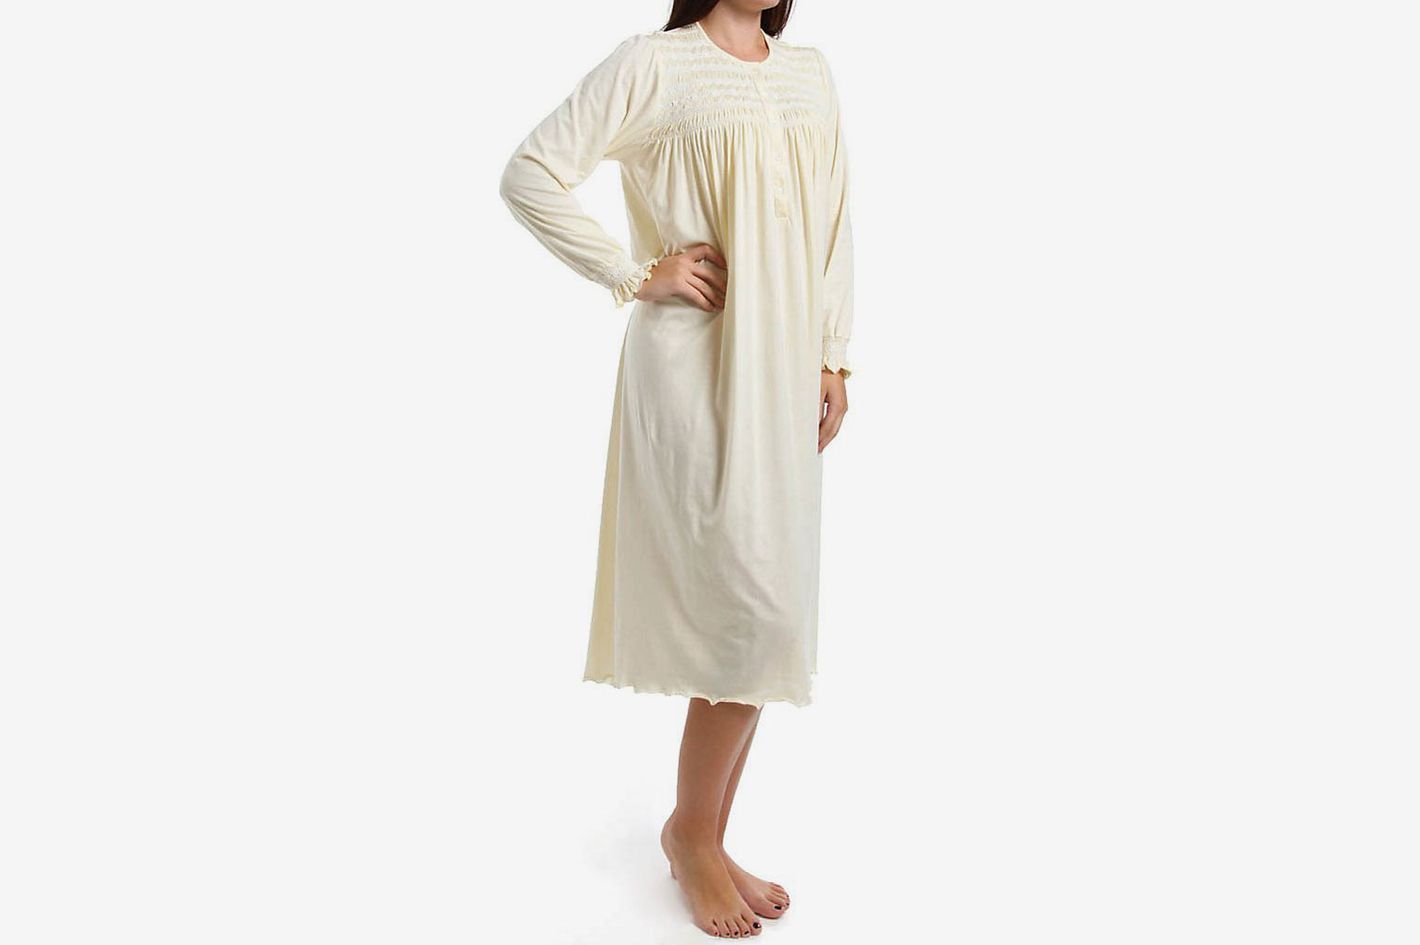 8 Best Dowdy Nightgowns 2019